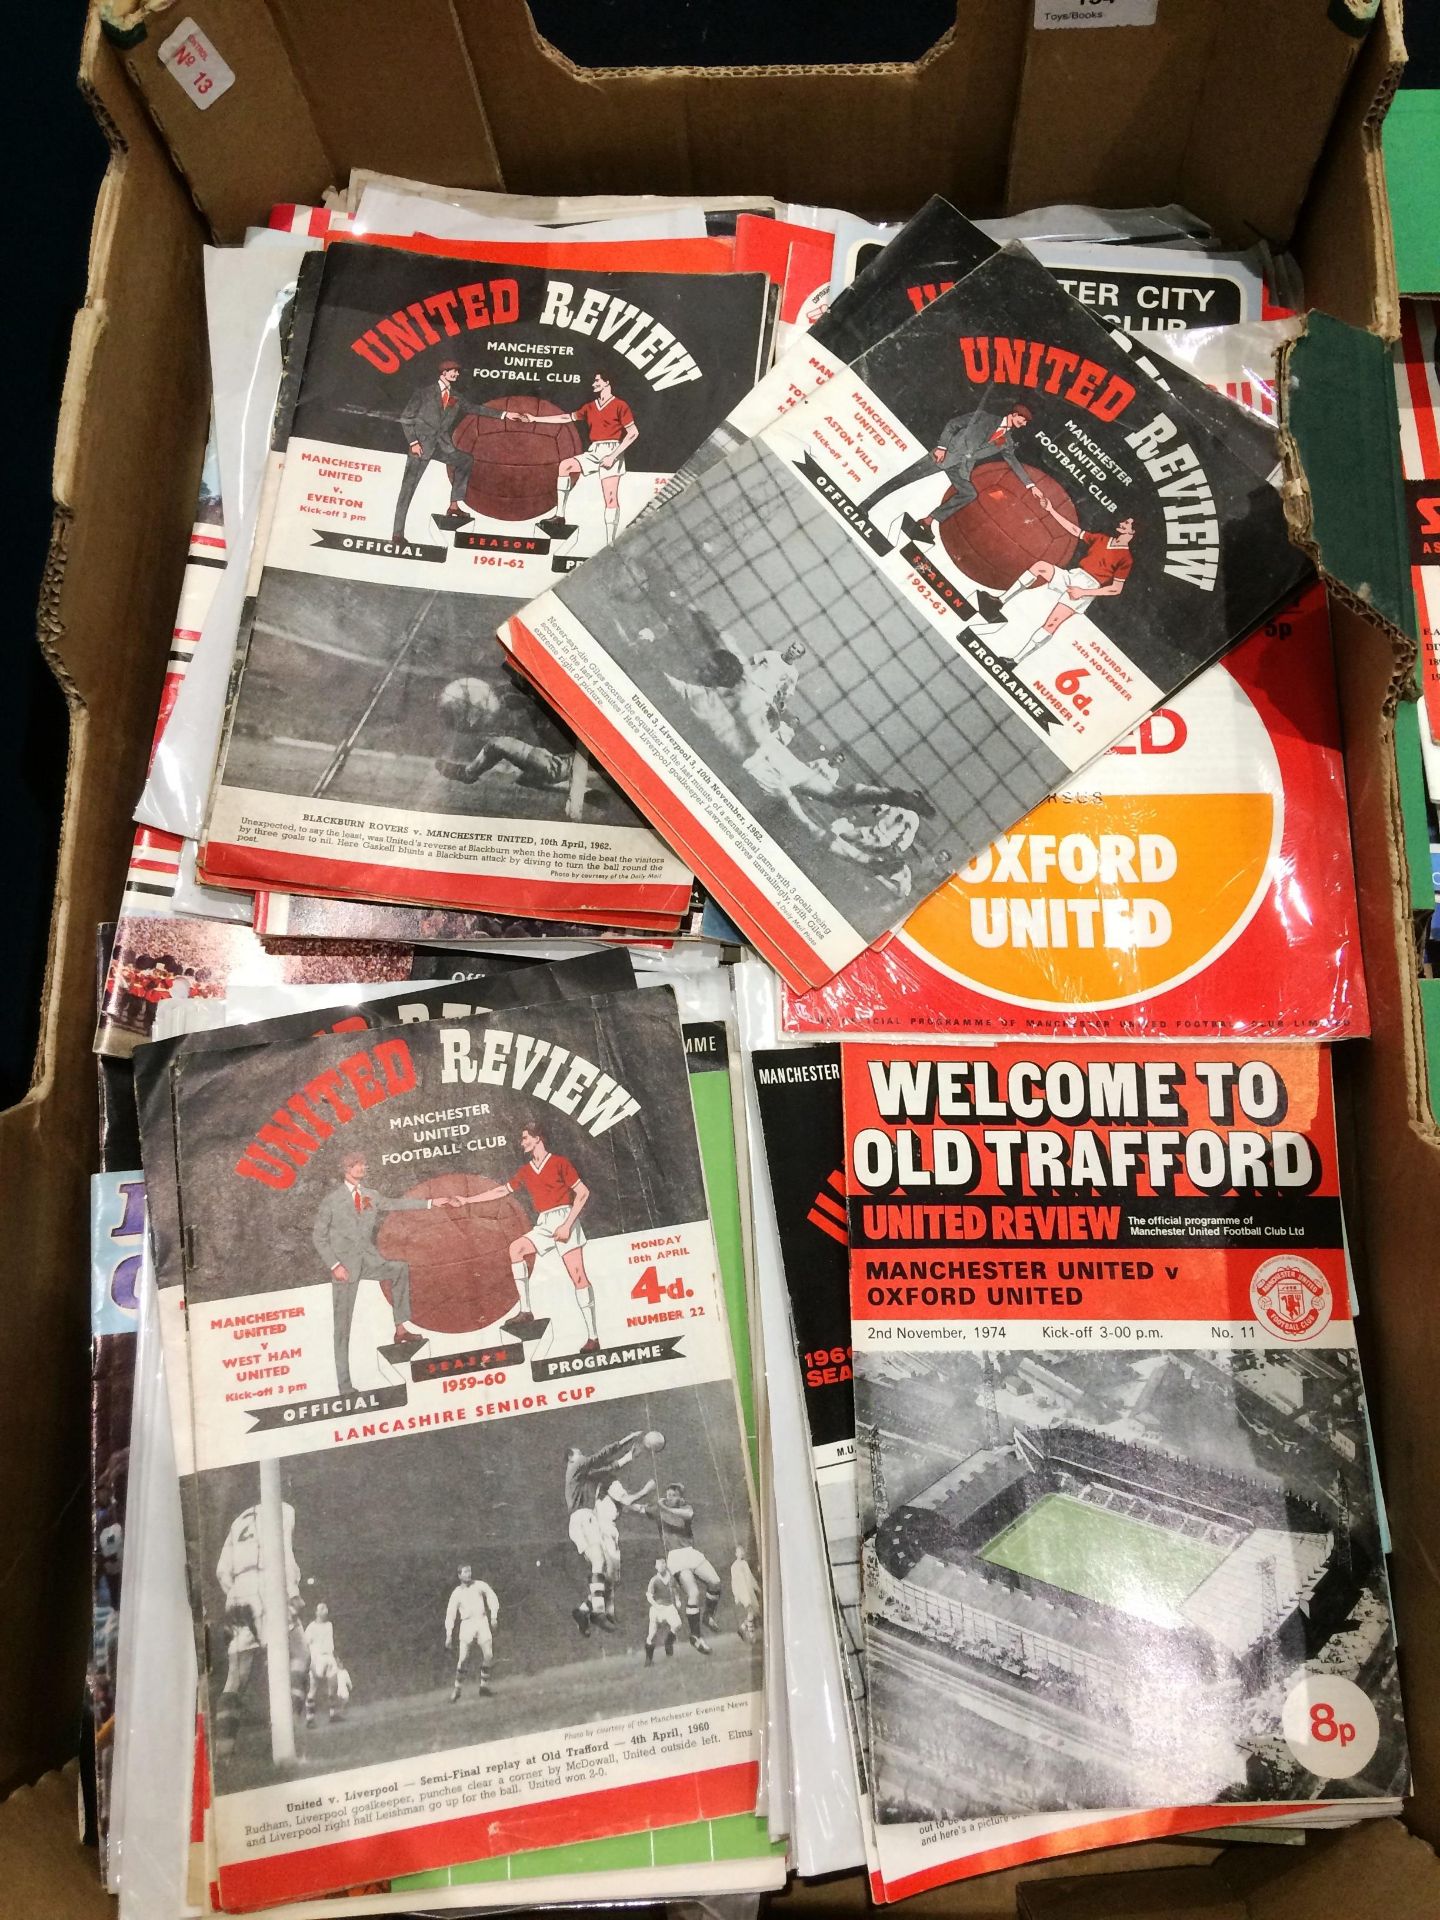 Contents to tray approx 230+ Manchester United Football programmes - 1950's, 60's, 70's etc.